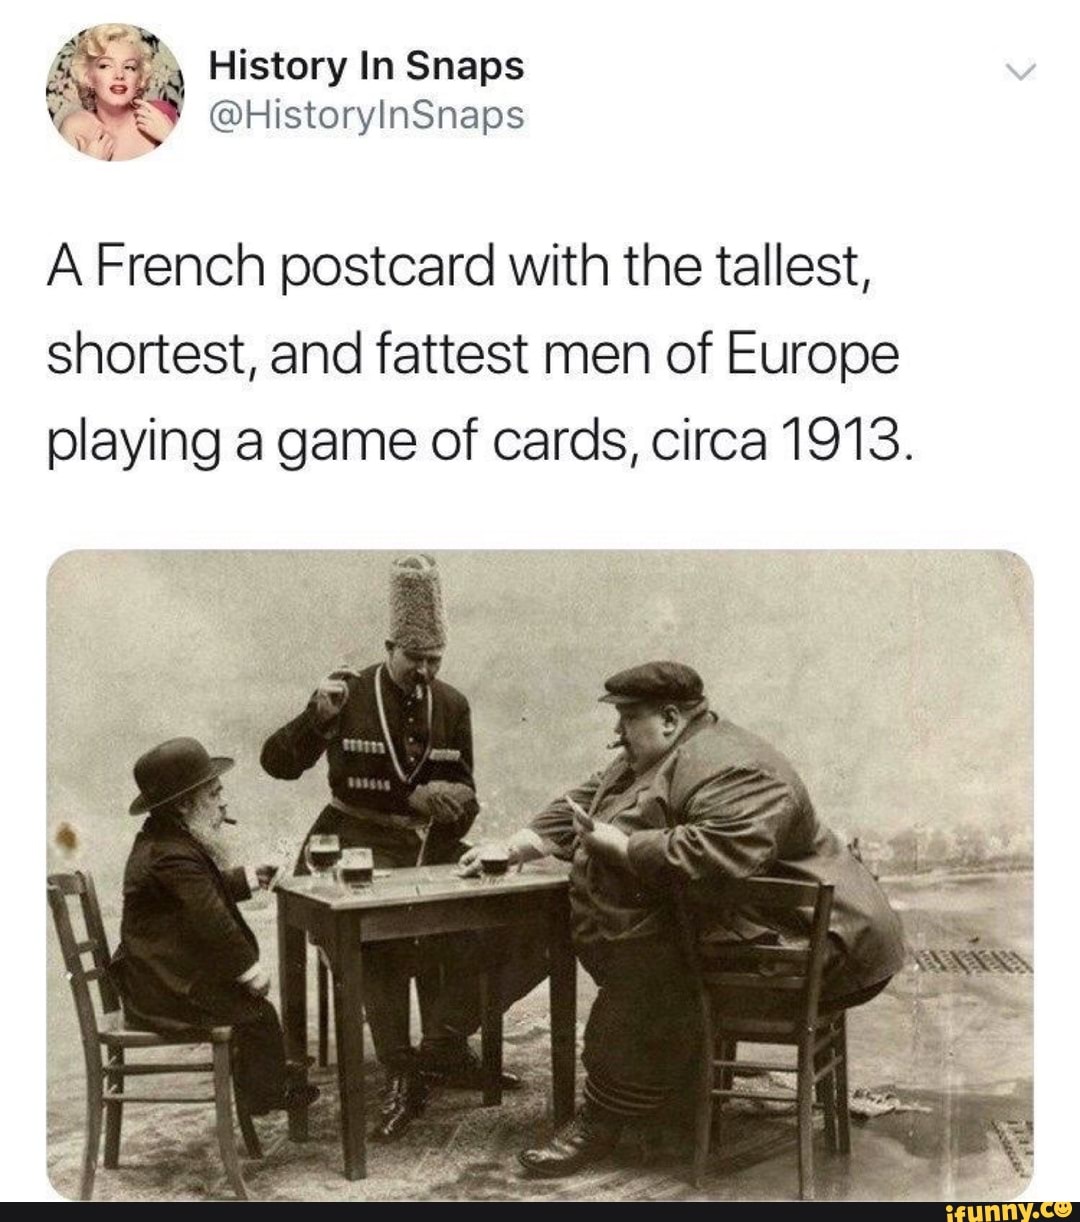 History Snaps @HistorylnSnaps A French postcard with the tallest, shortest, and fattest men of Europe playing a game of cards, circa 1913.